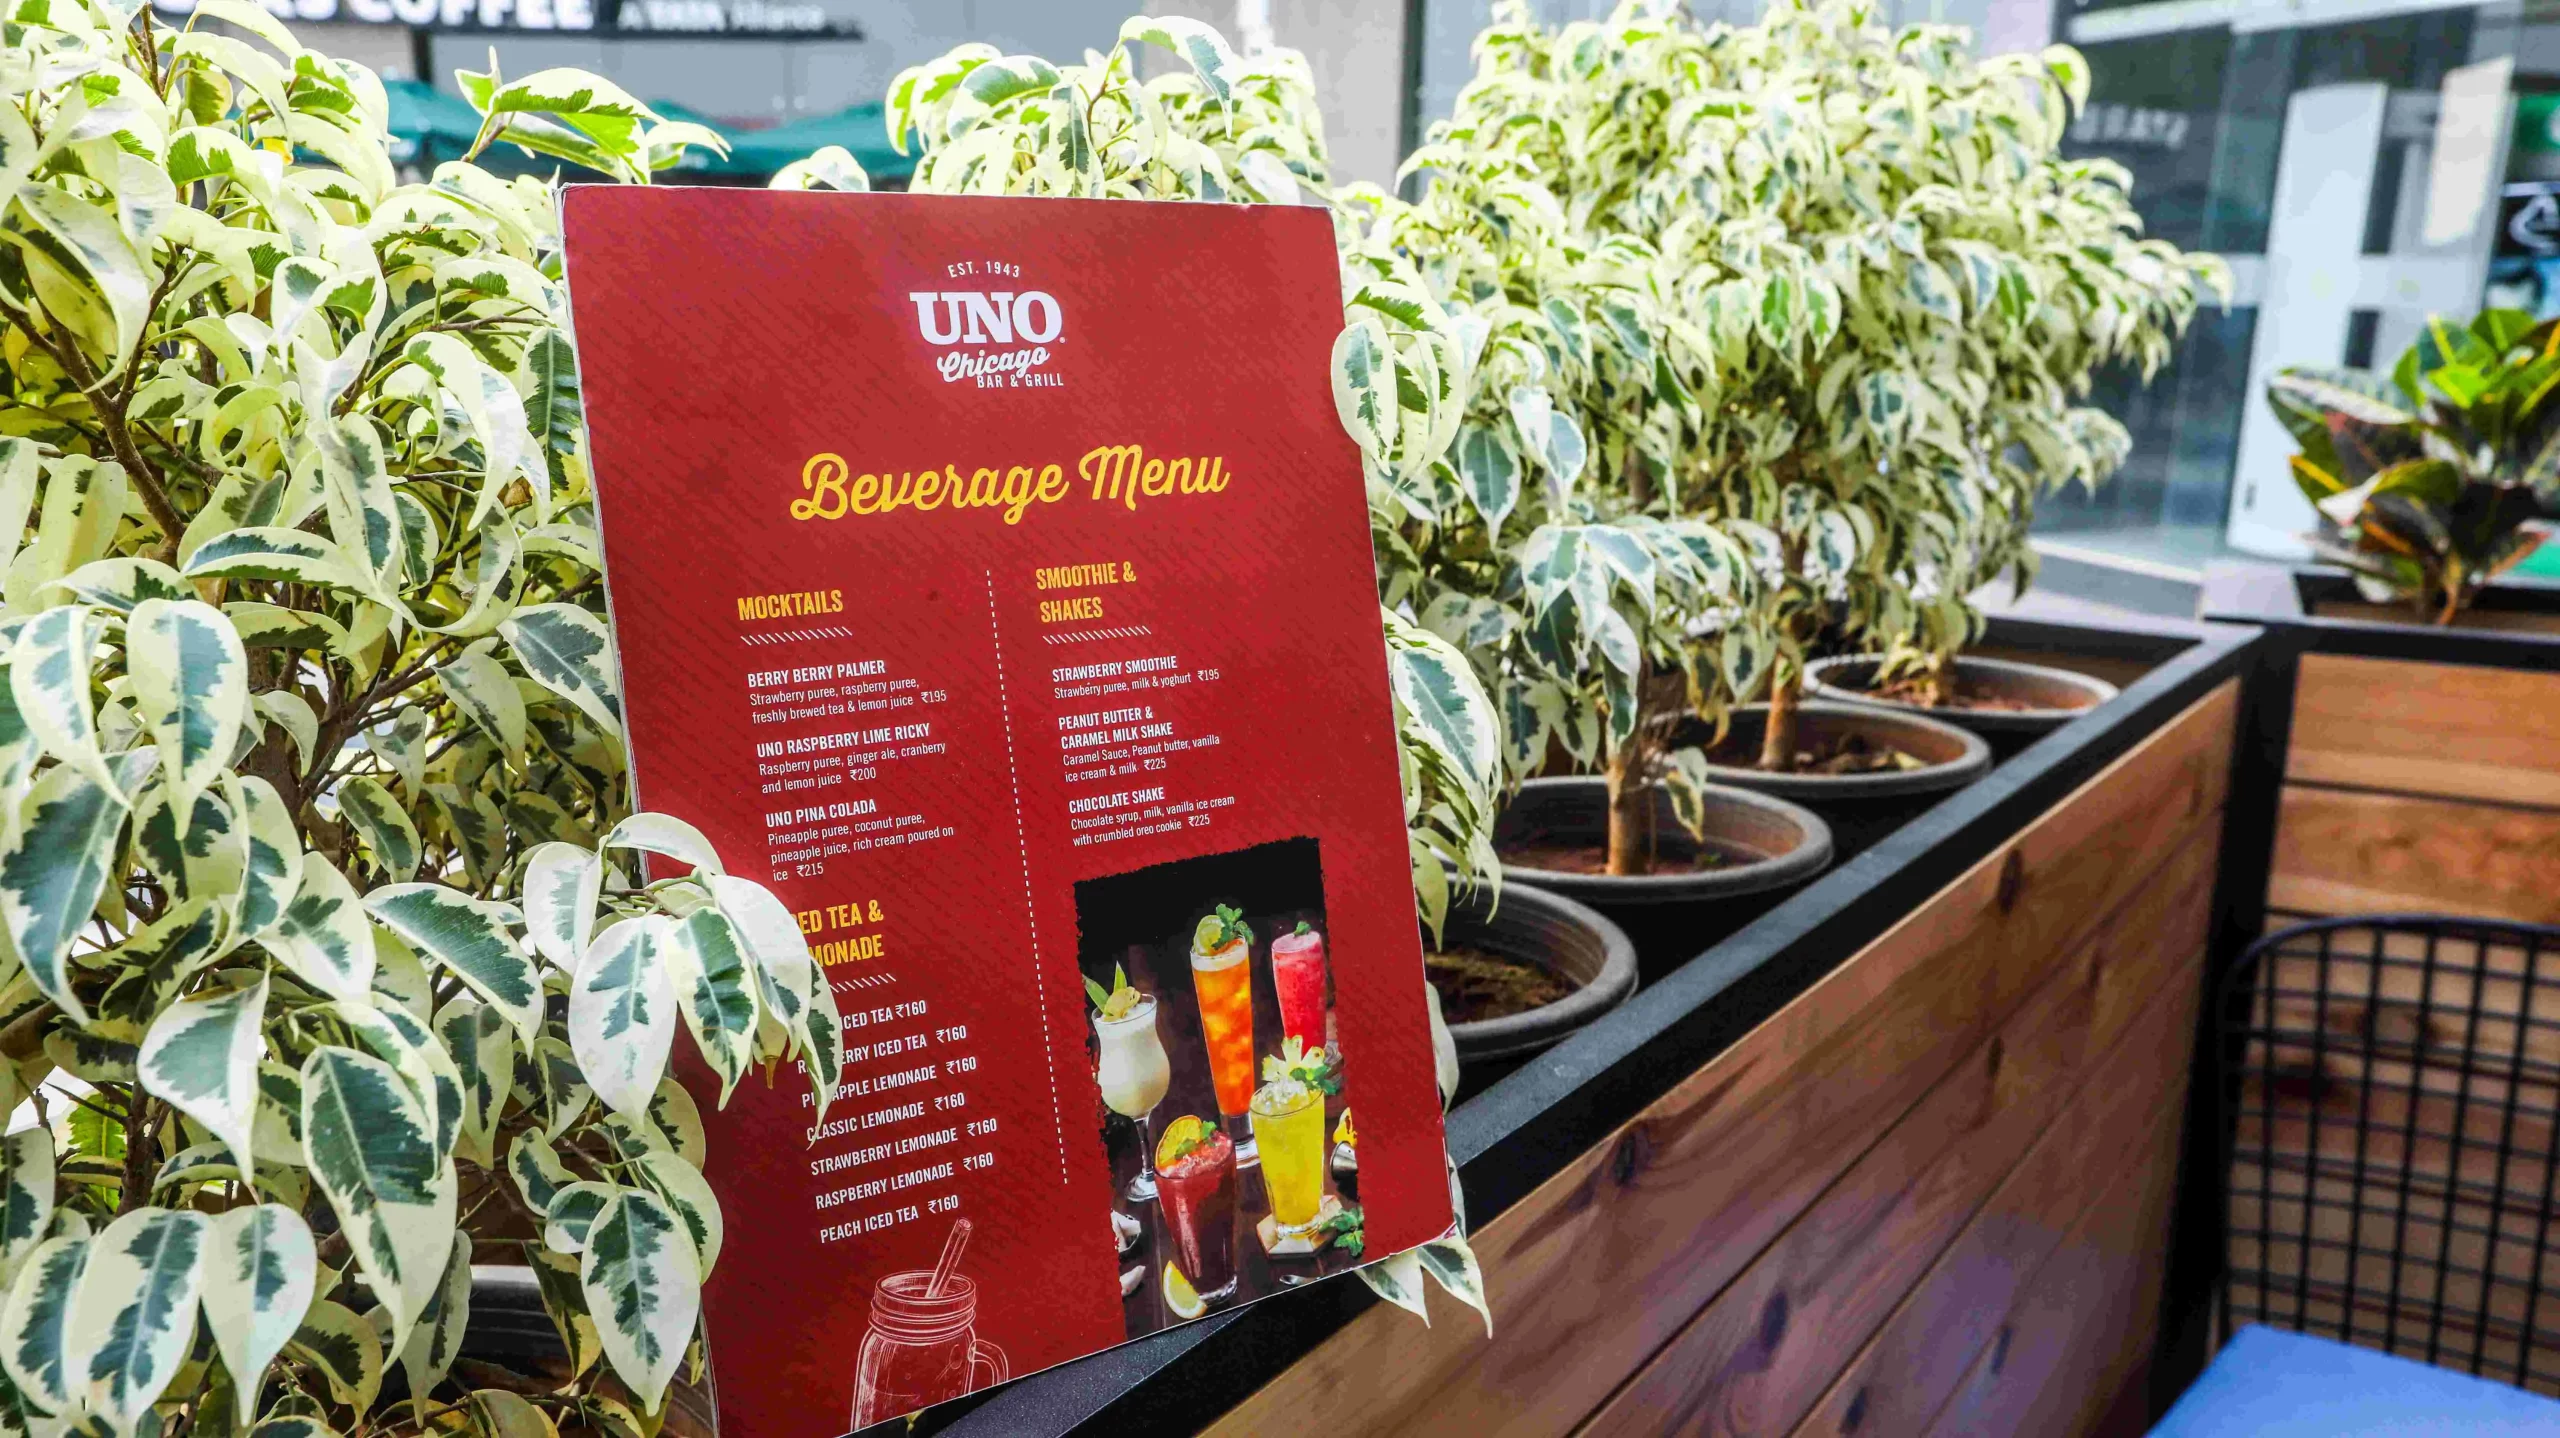 A menu is displayed on a table next to a potted plant.